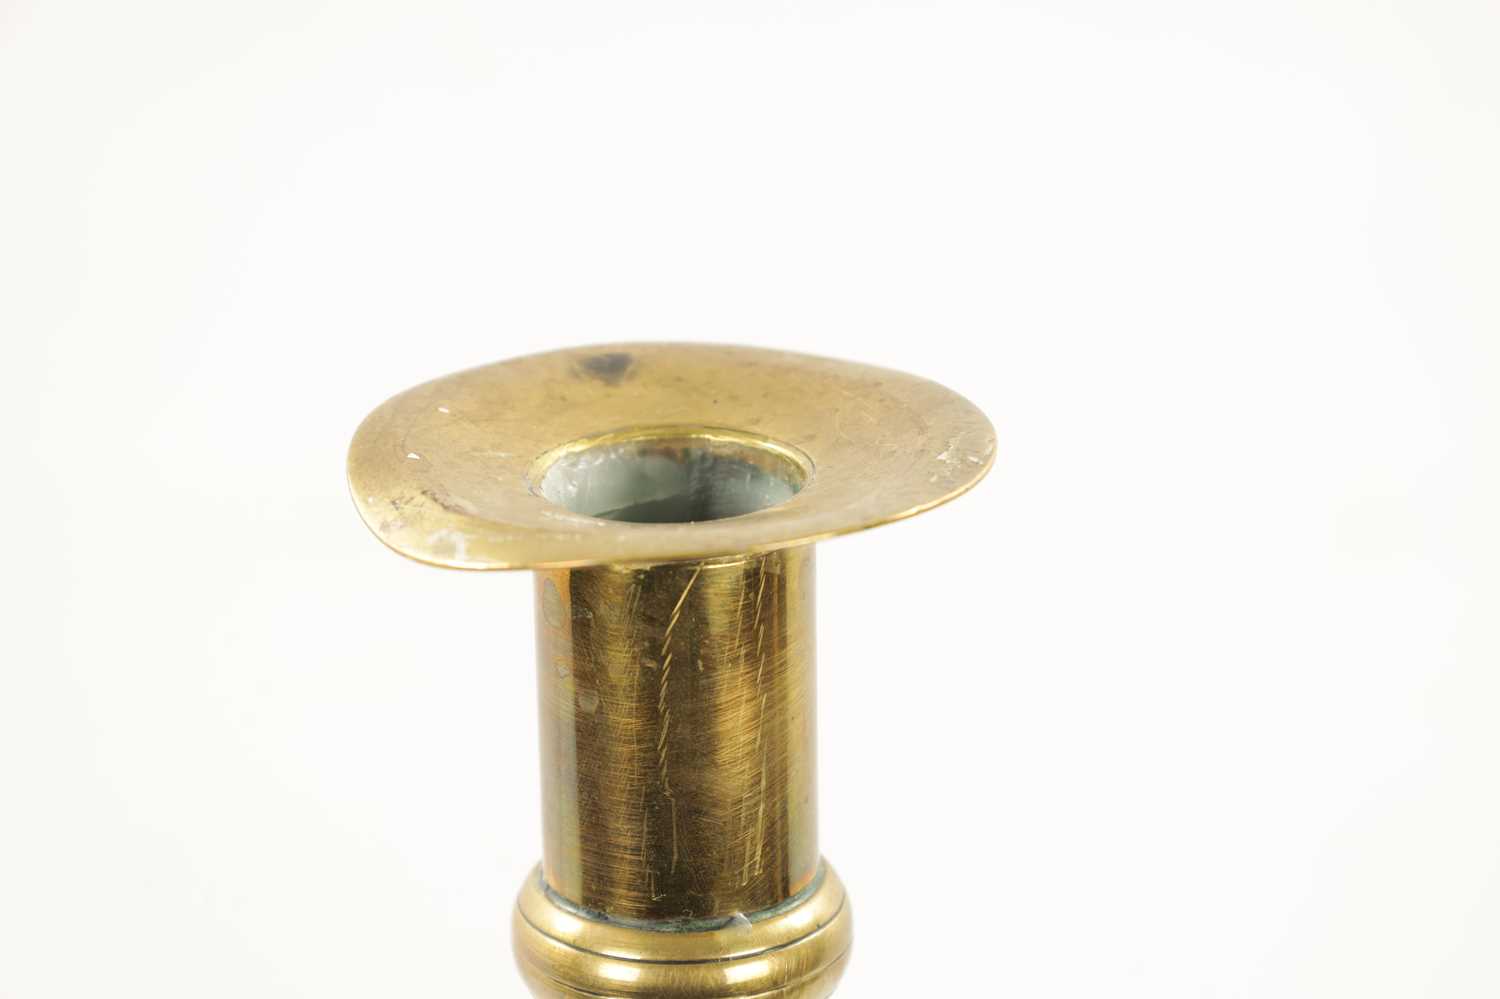 A PAIR OF LARGE 19TH CENTURY BRASS EJECTOR 'PULPIT' BRASS CANDLESTICKS - Image 7 of 7